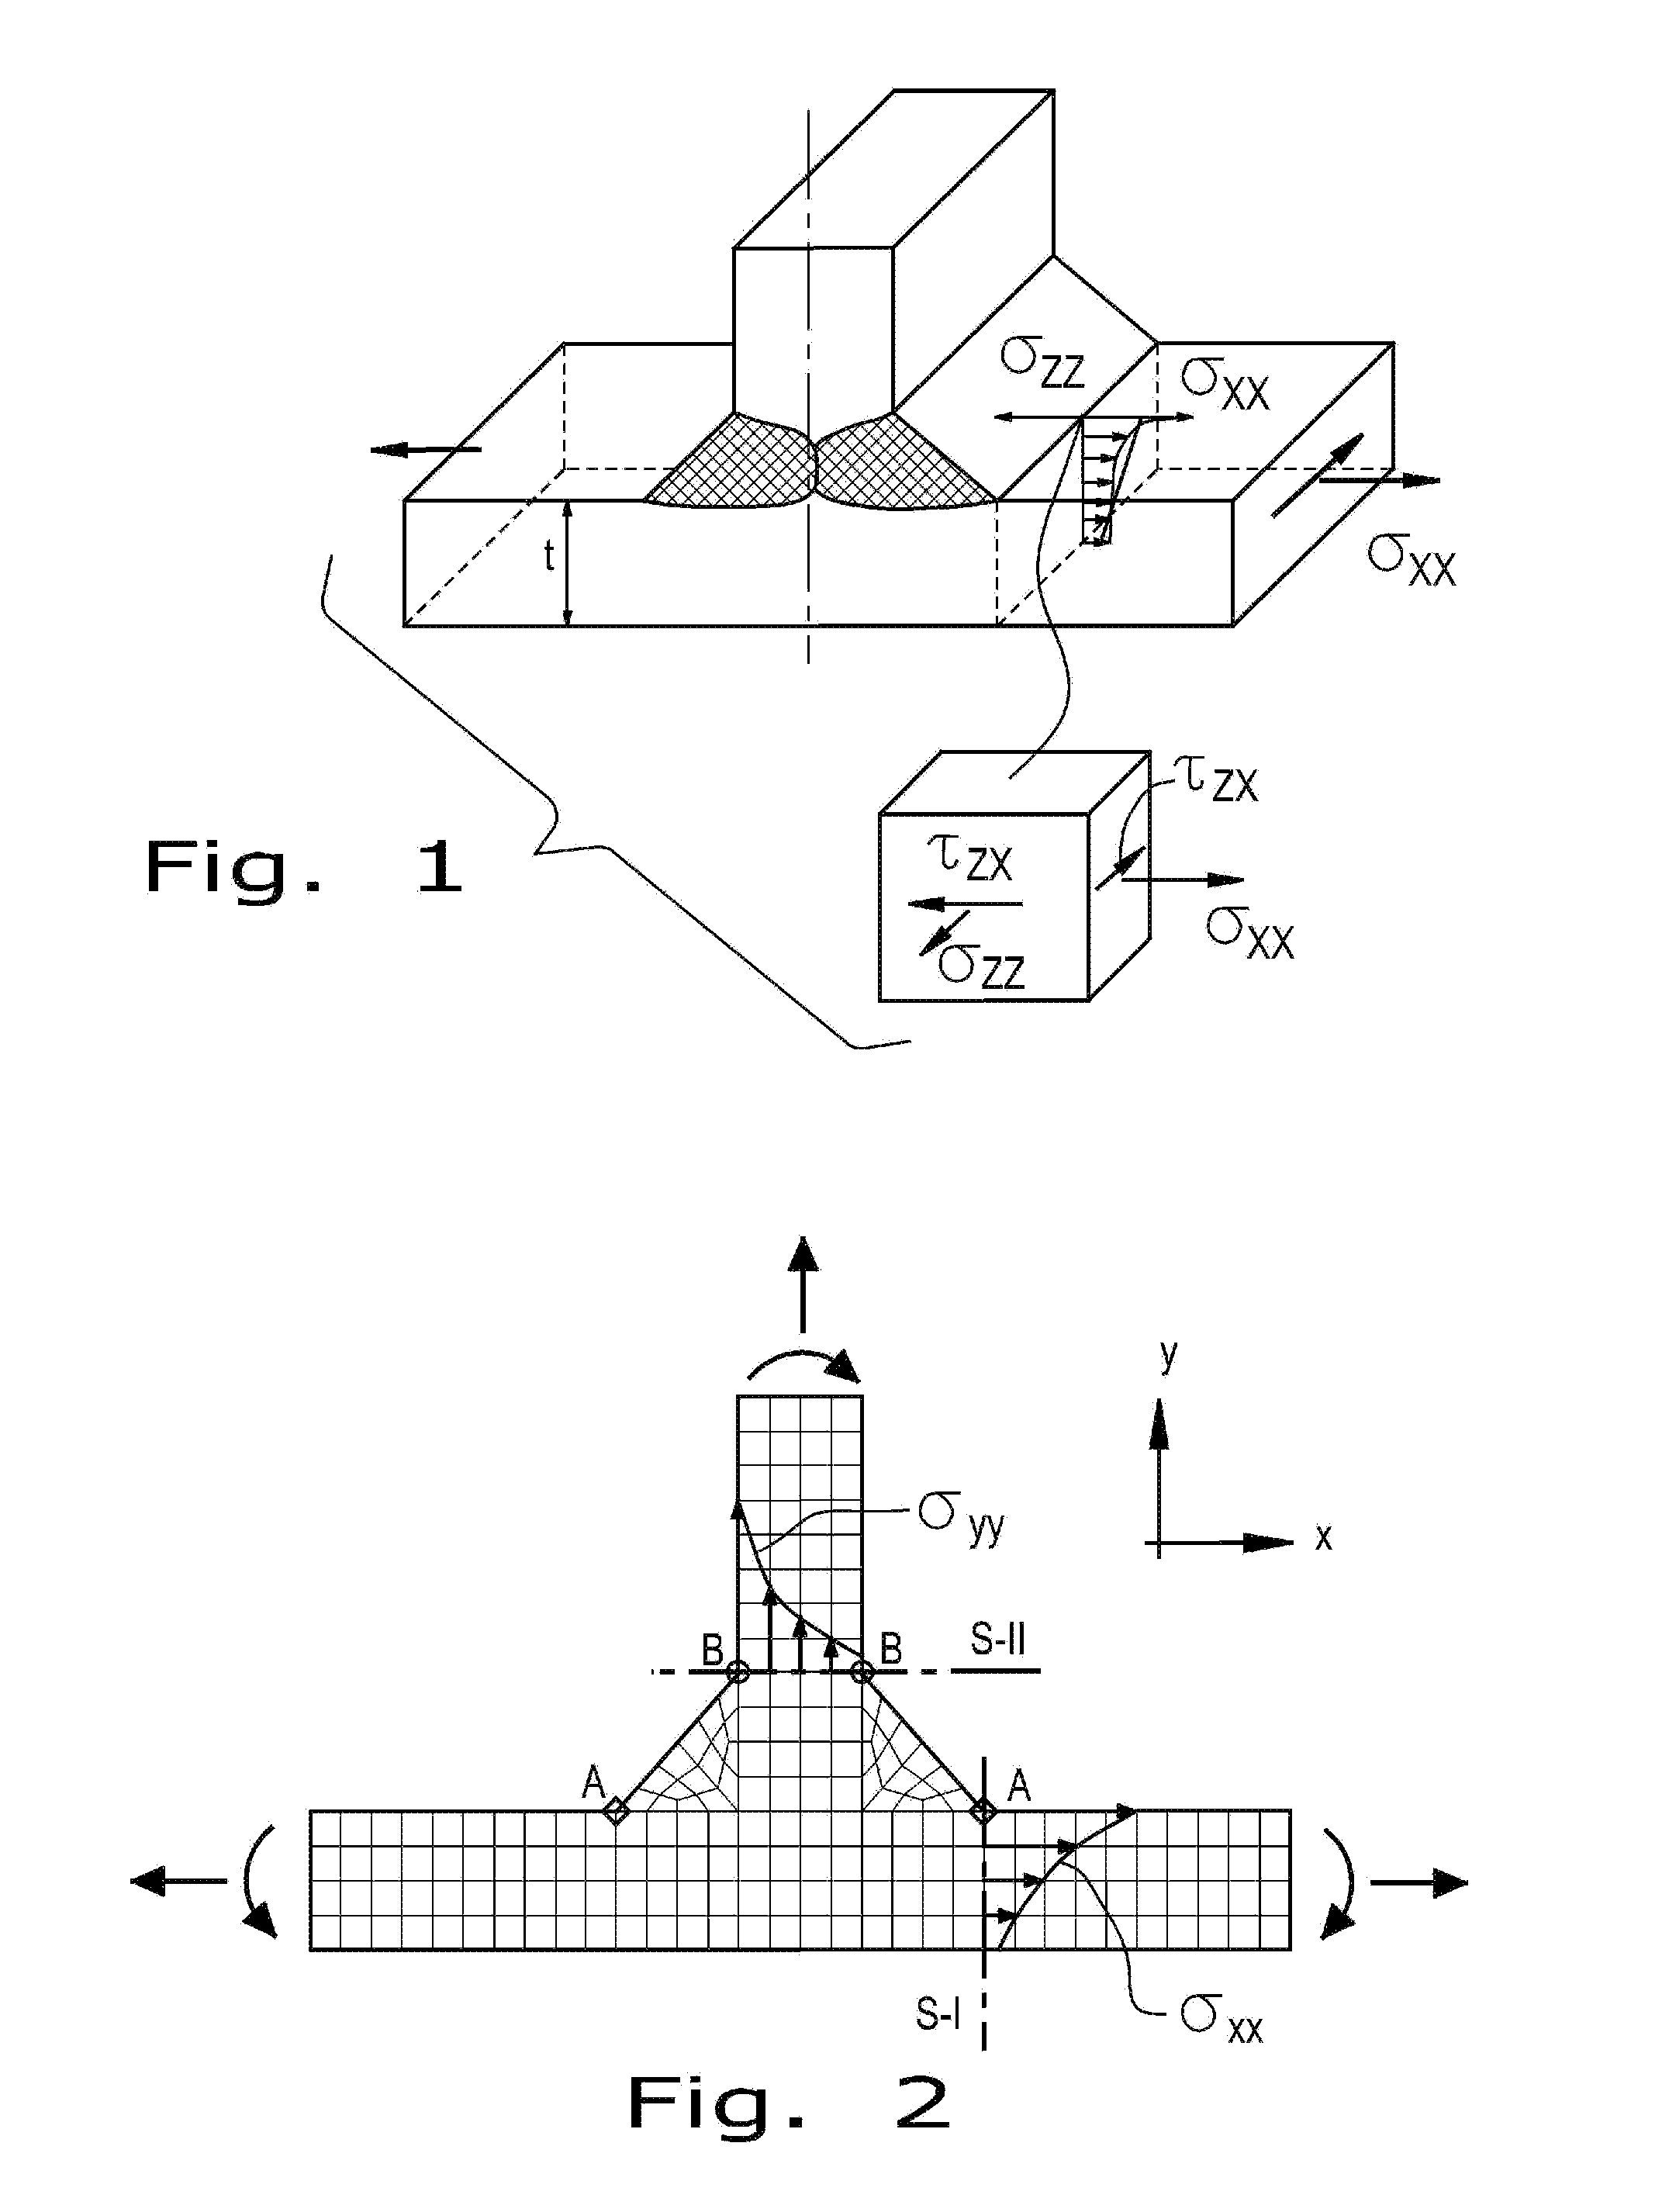 Method for the prediction of fatigue life for structures